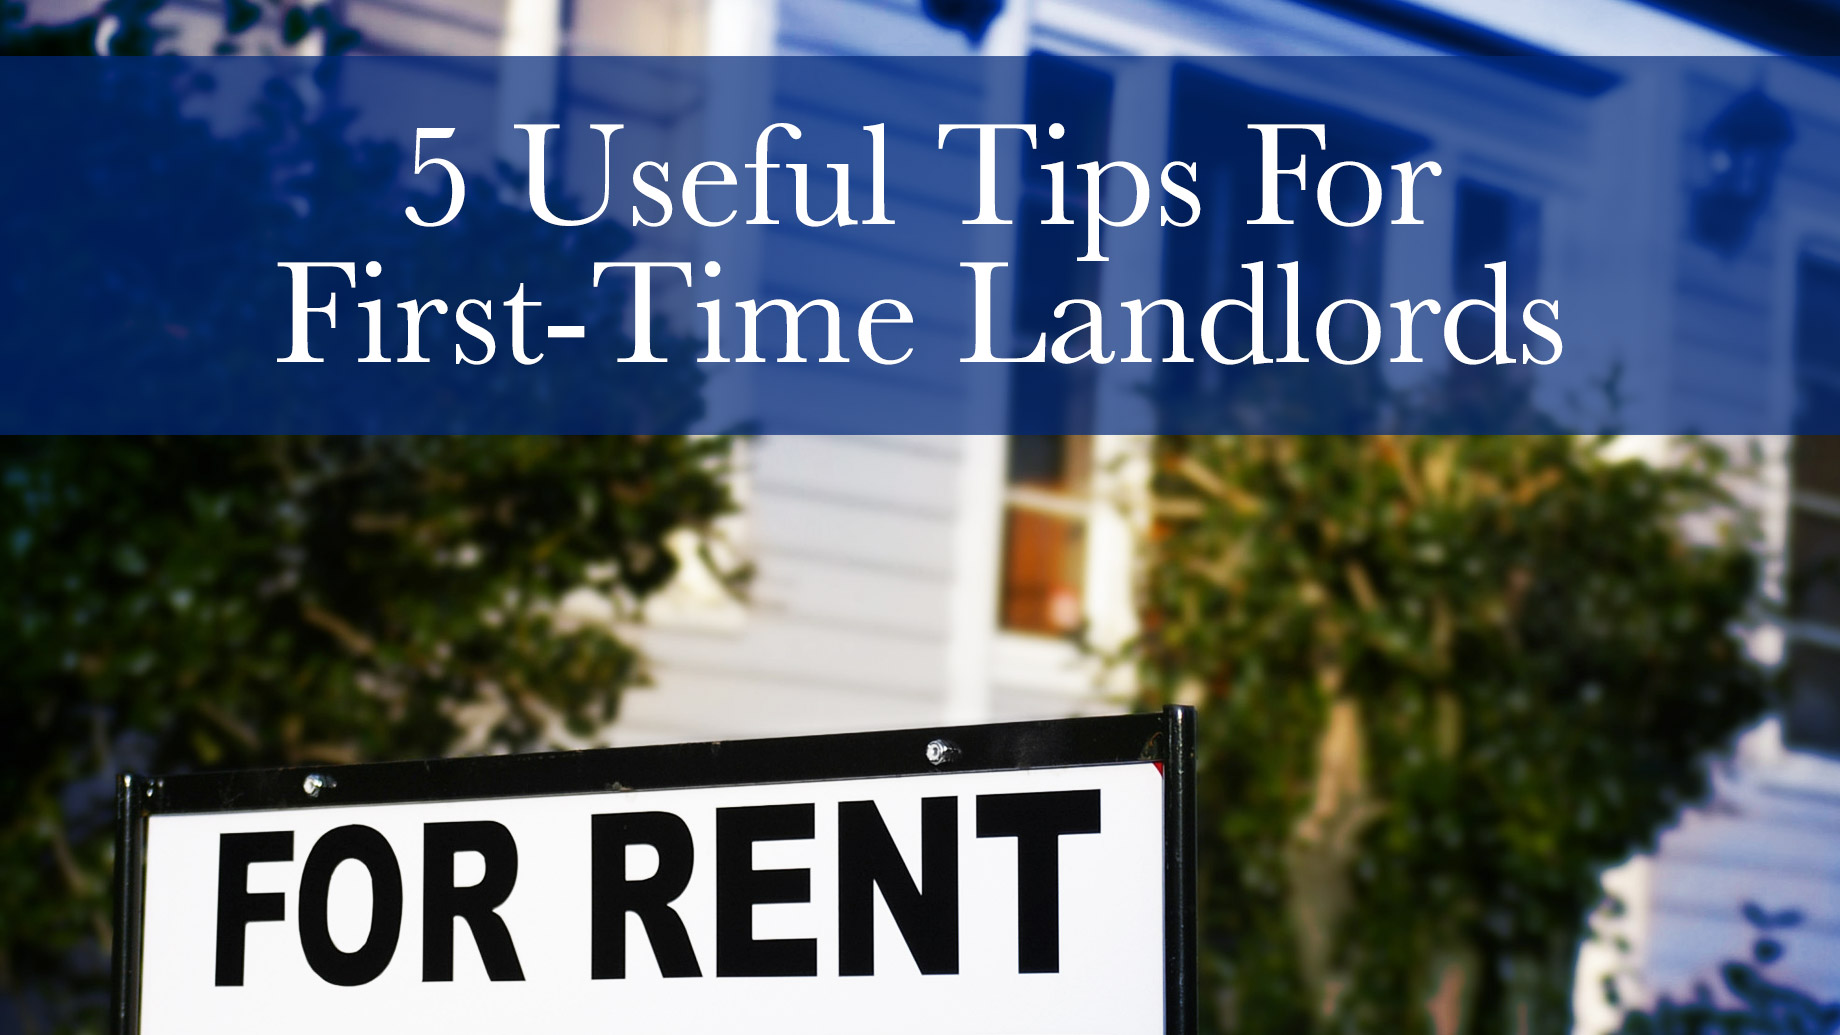 5 Useful Tips For First-Time Landlords